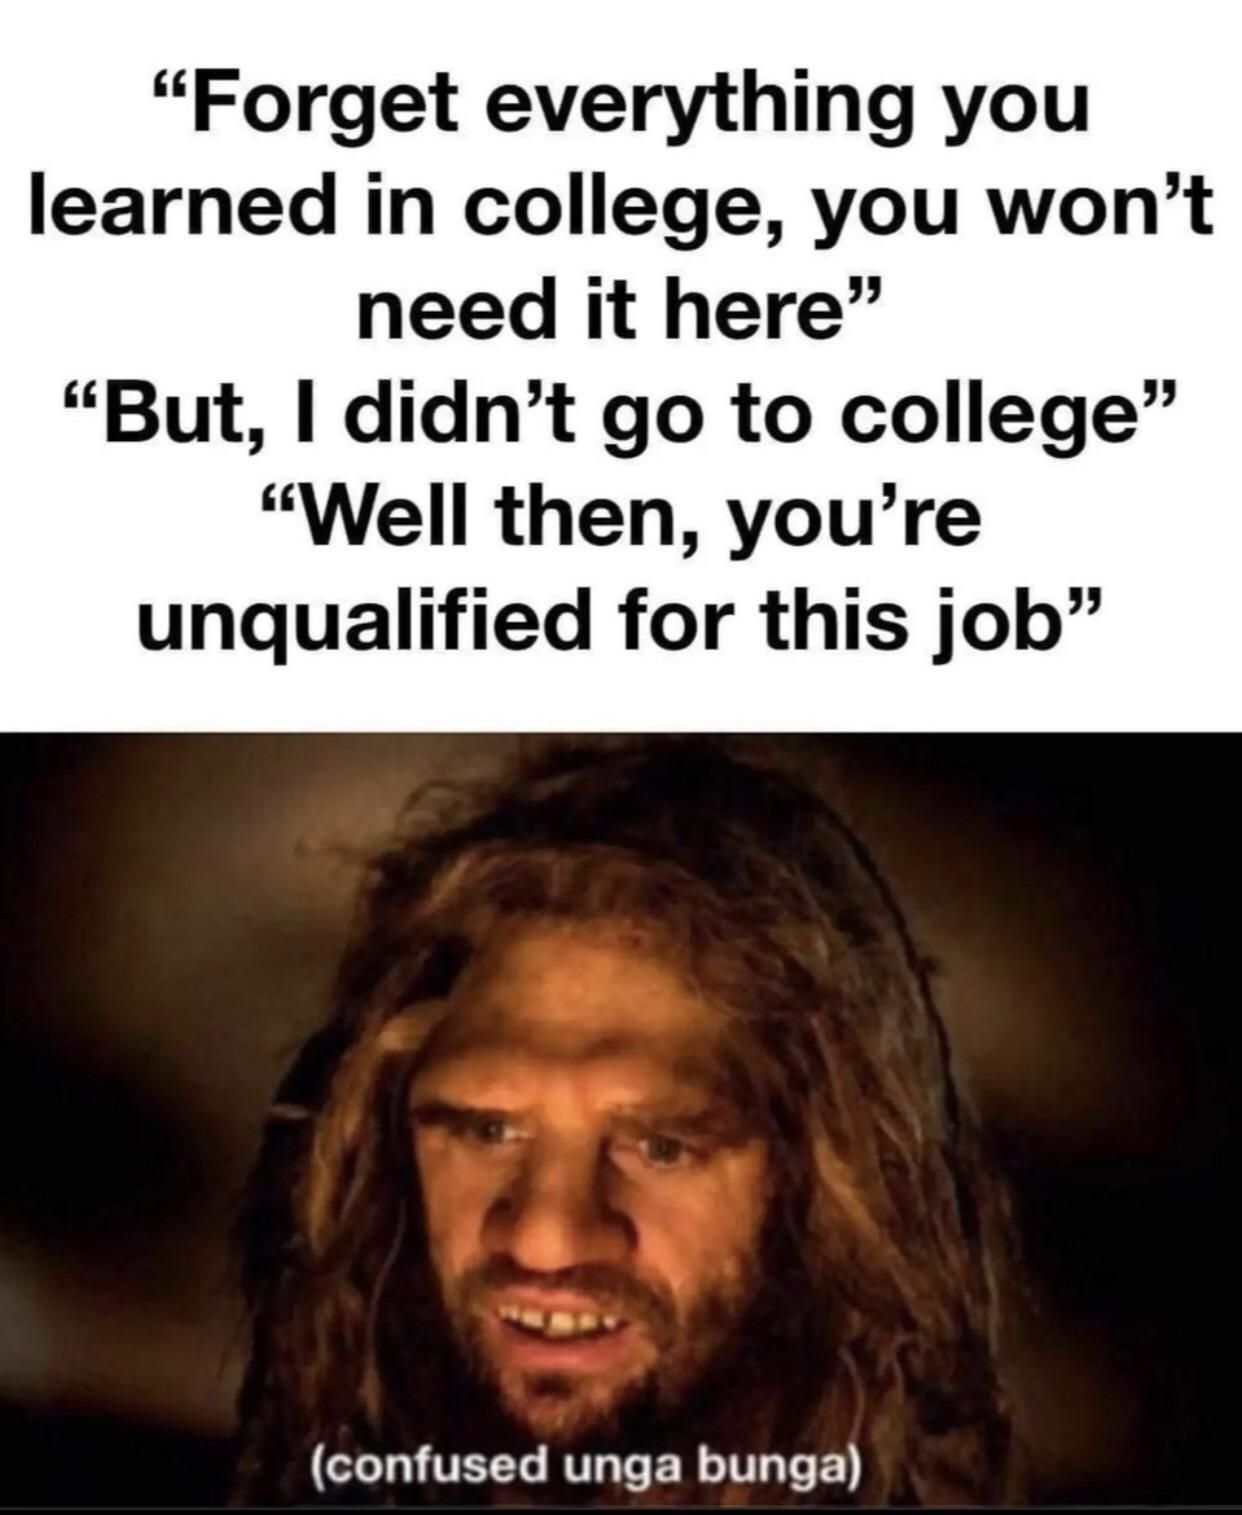 You have to have a college degree to work here